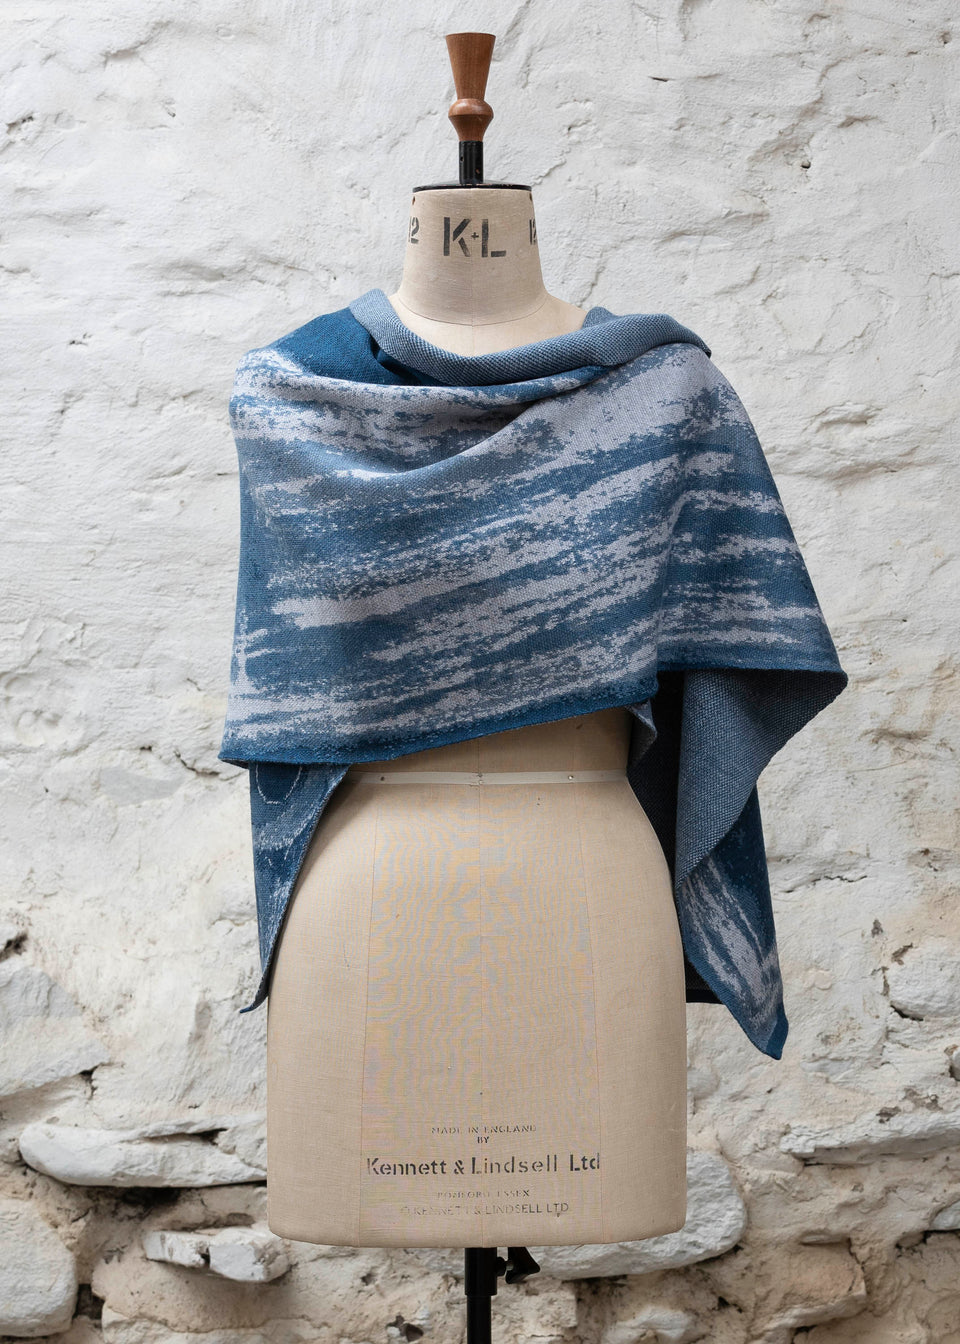 Finely knitted shawl in luxurious merino, made in Scotland. Shown on a vintage mannequin against a whitewashed wall. Abstract design in sea blues with curvilinear motifs. Wrapped around for a shorter style and shown from front